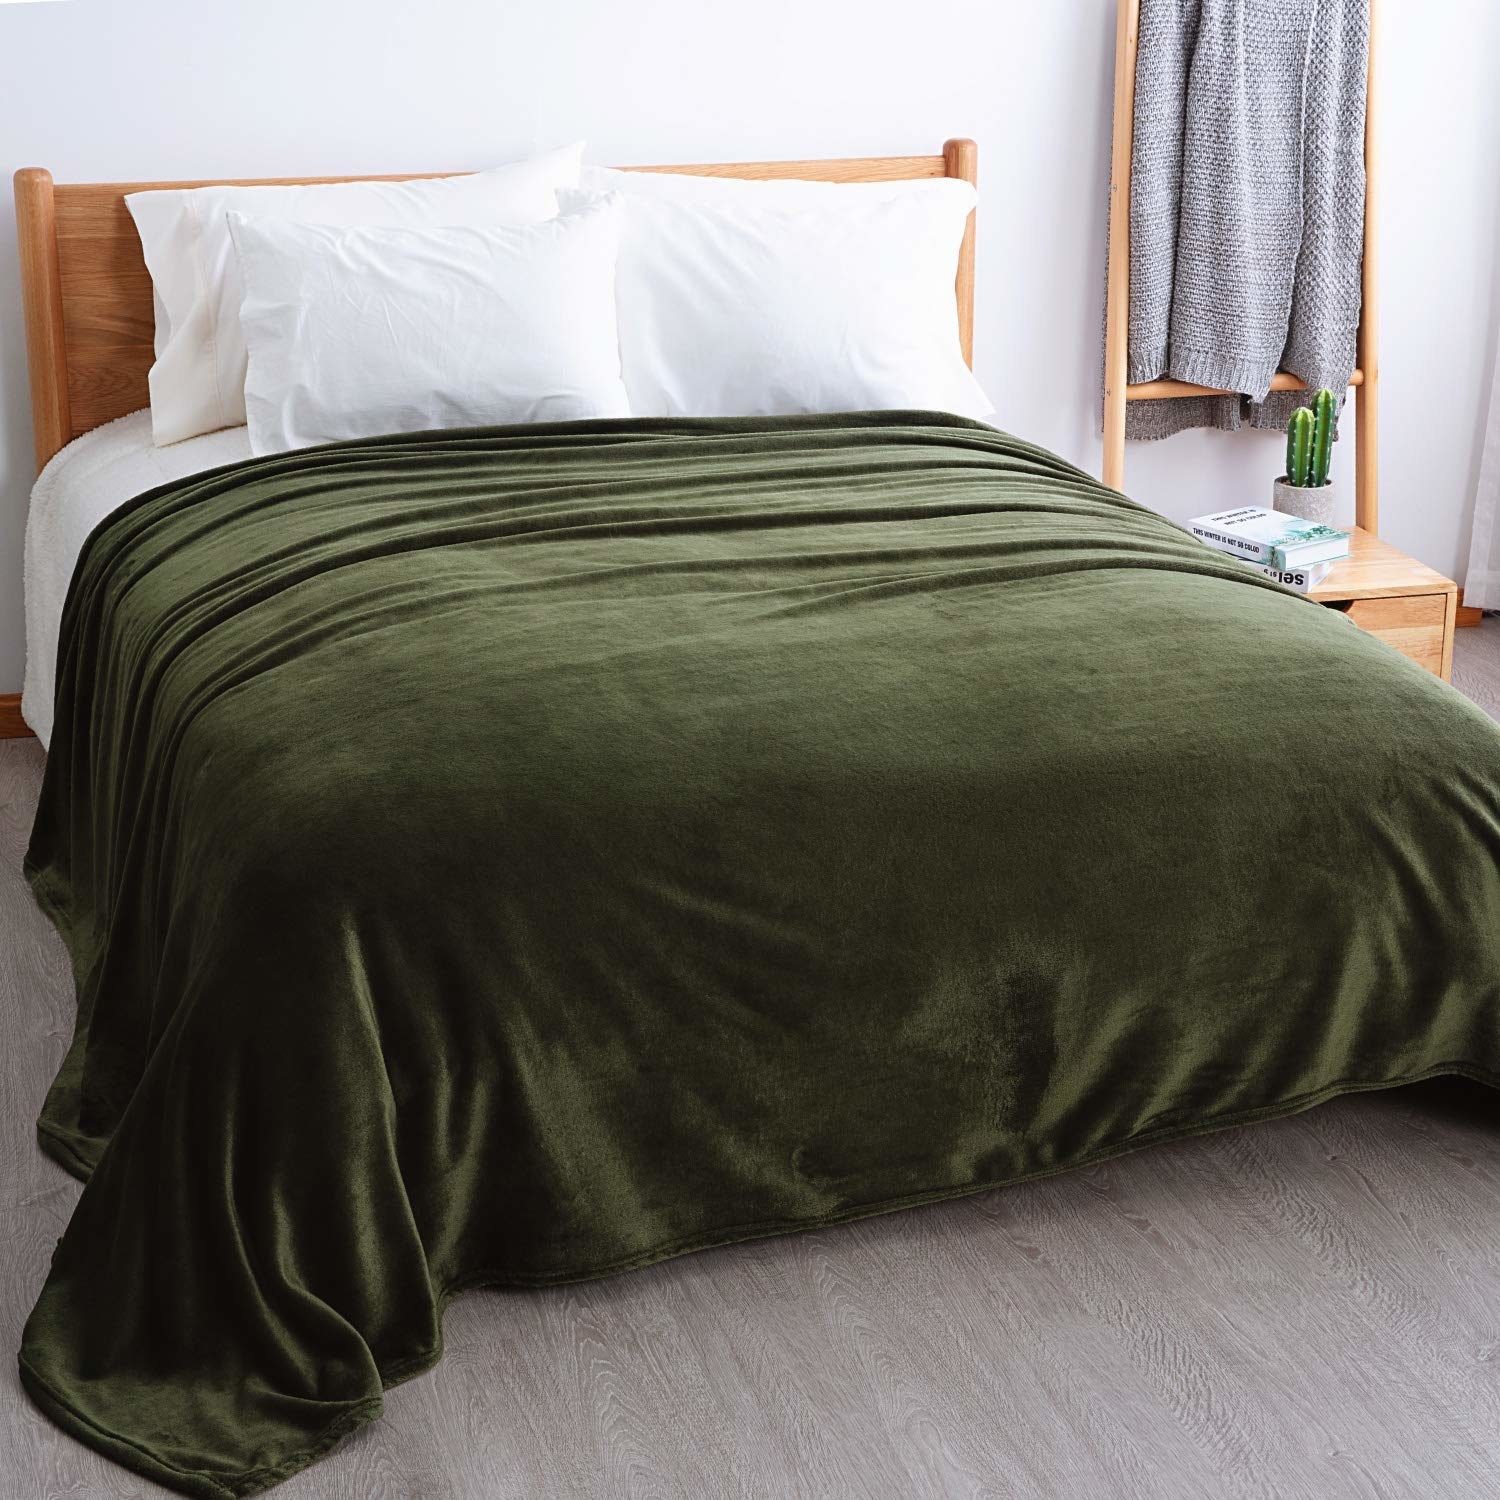 33 Things That'll Help You Get The Bed Of Your Dreams